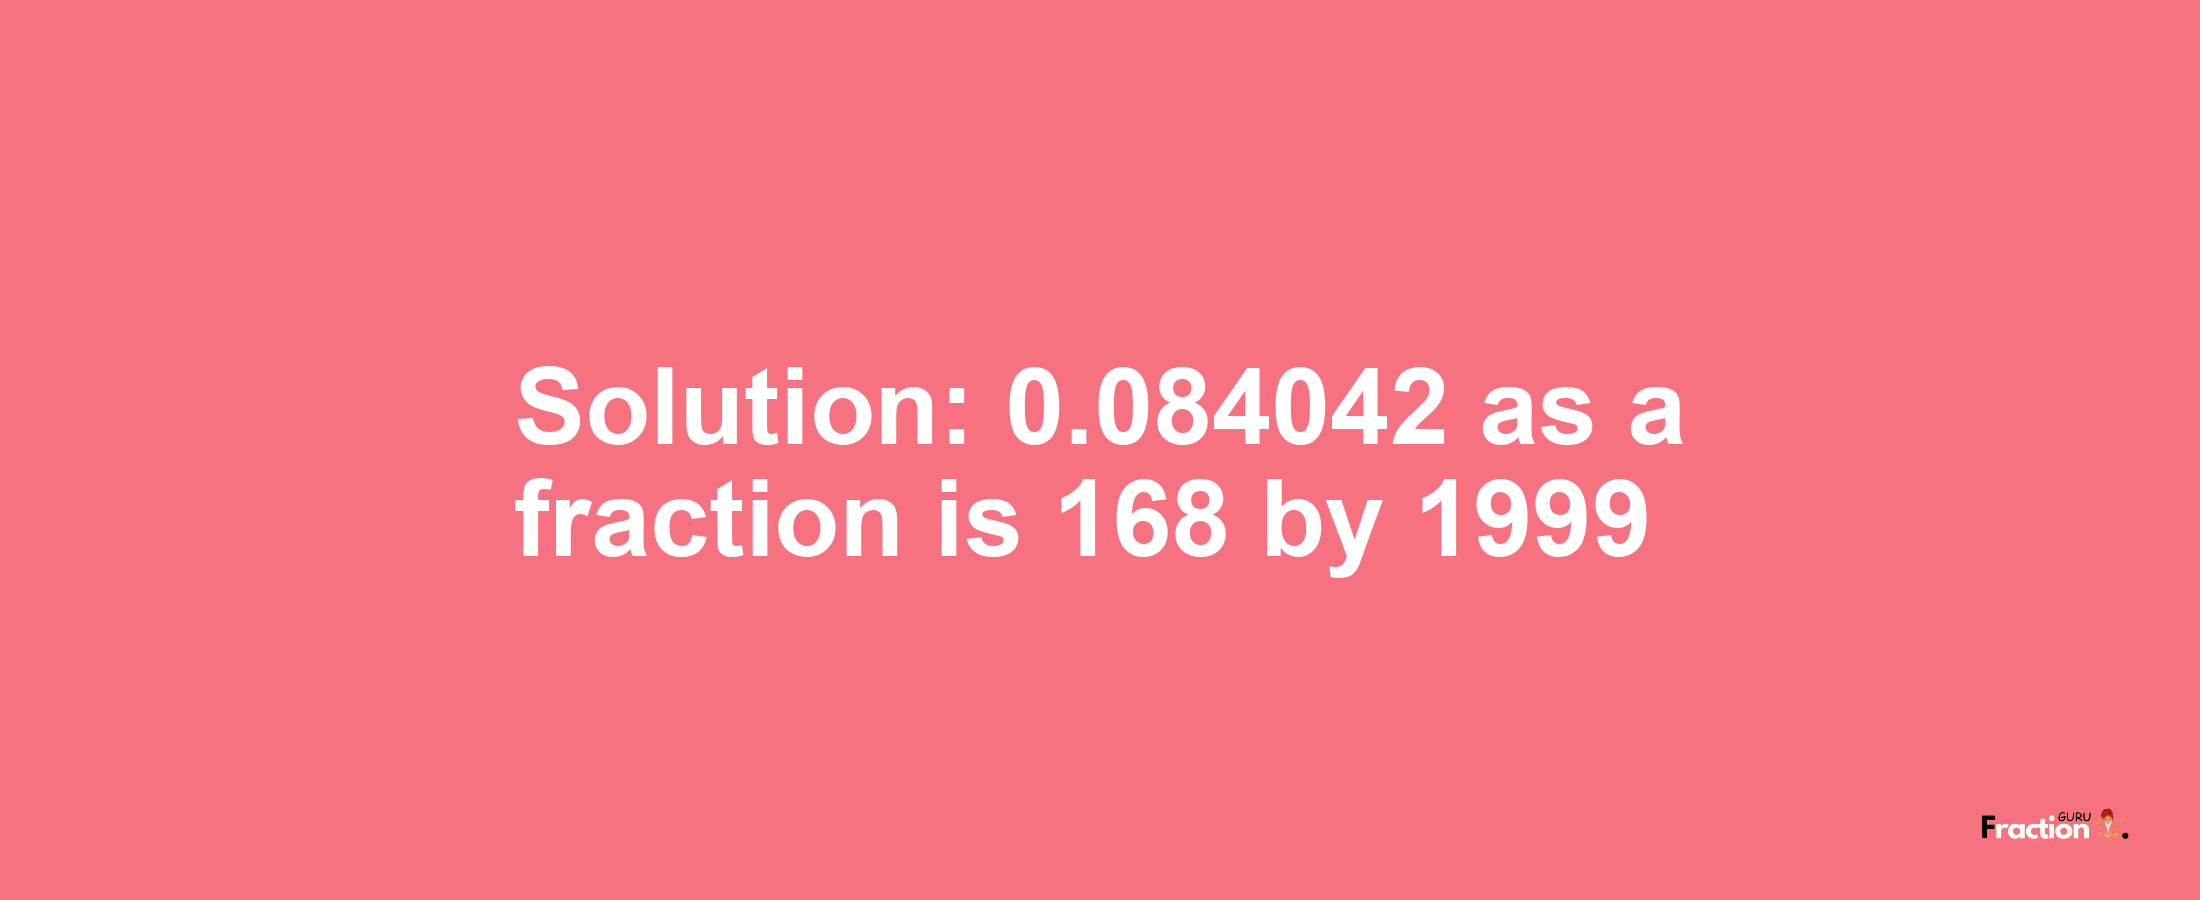 Solution:0.084042 as a fraction is 168/1999